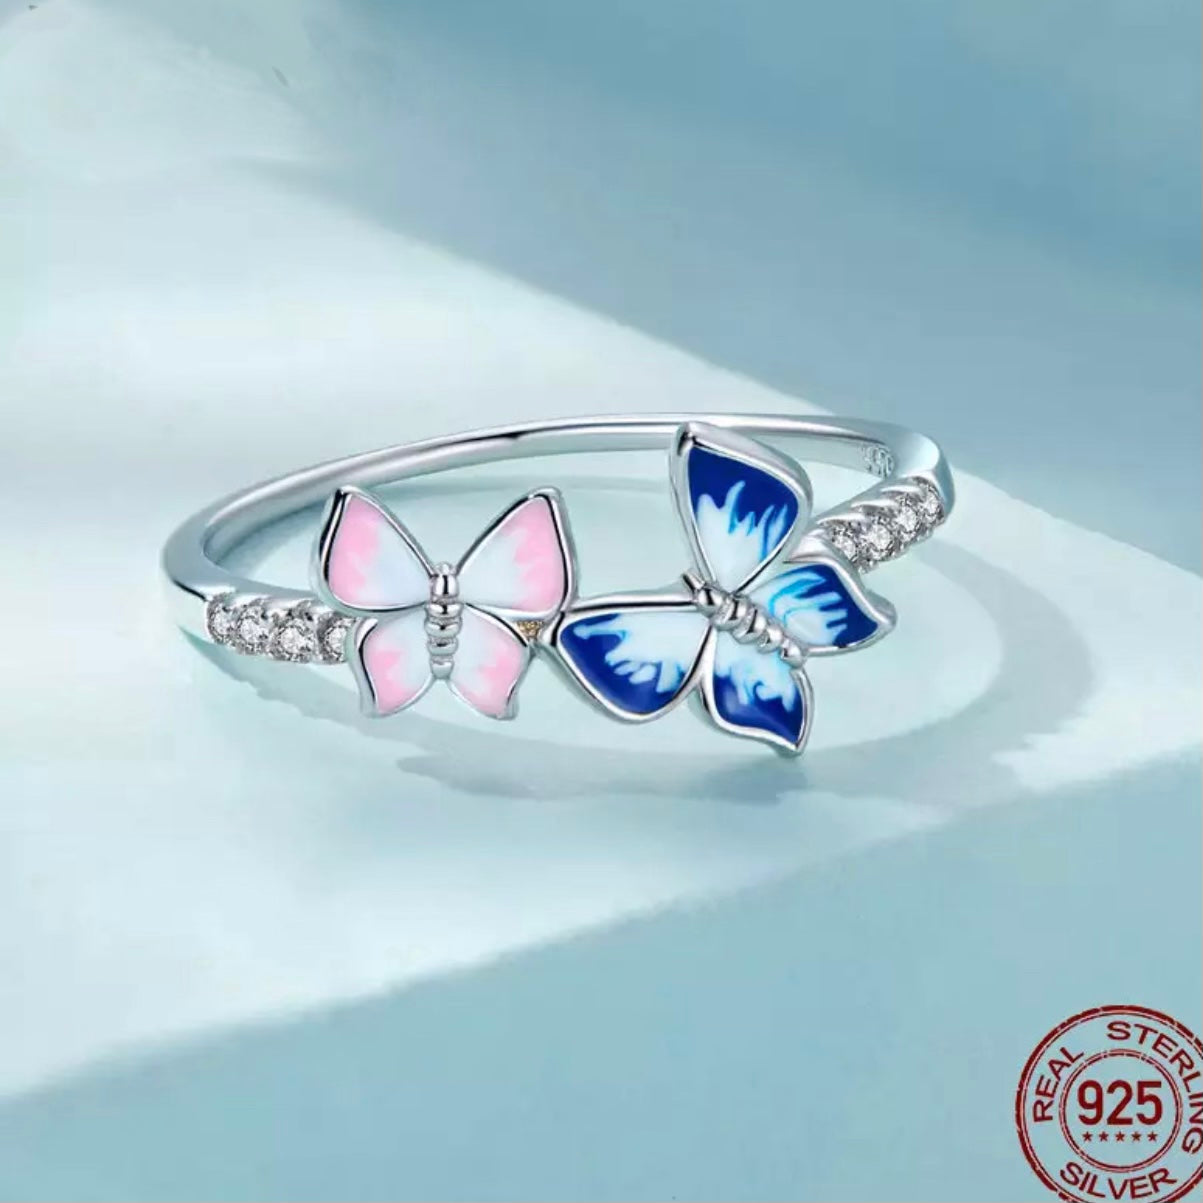 MARIPOSA STERLING SILVER BUTTERFLY RING SET WITH CUBIC ZIRCONIA